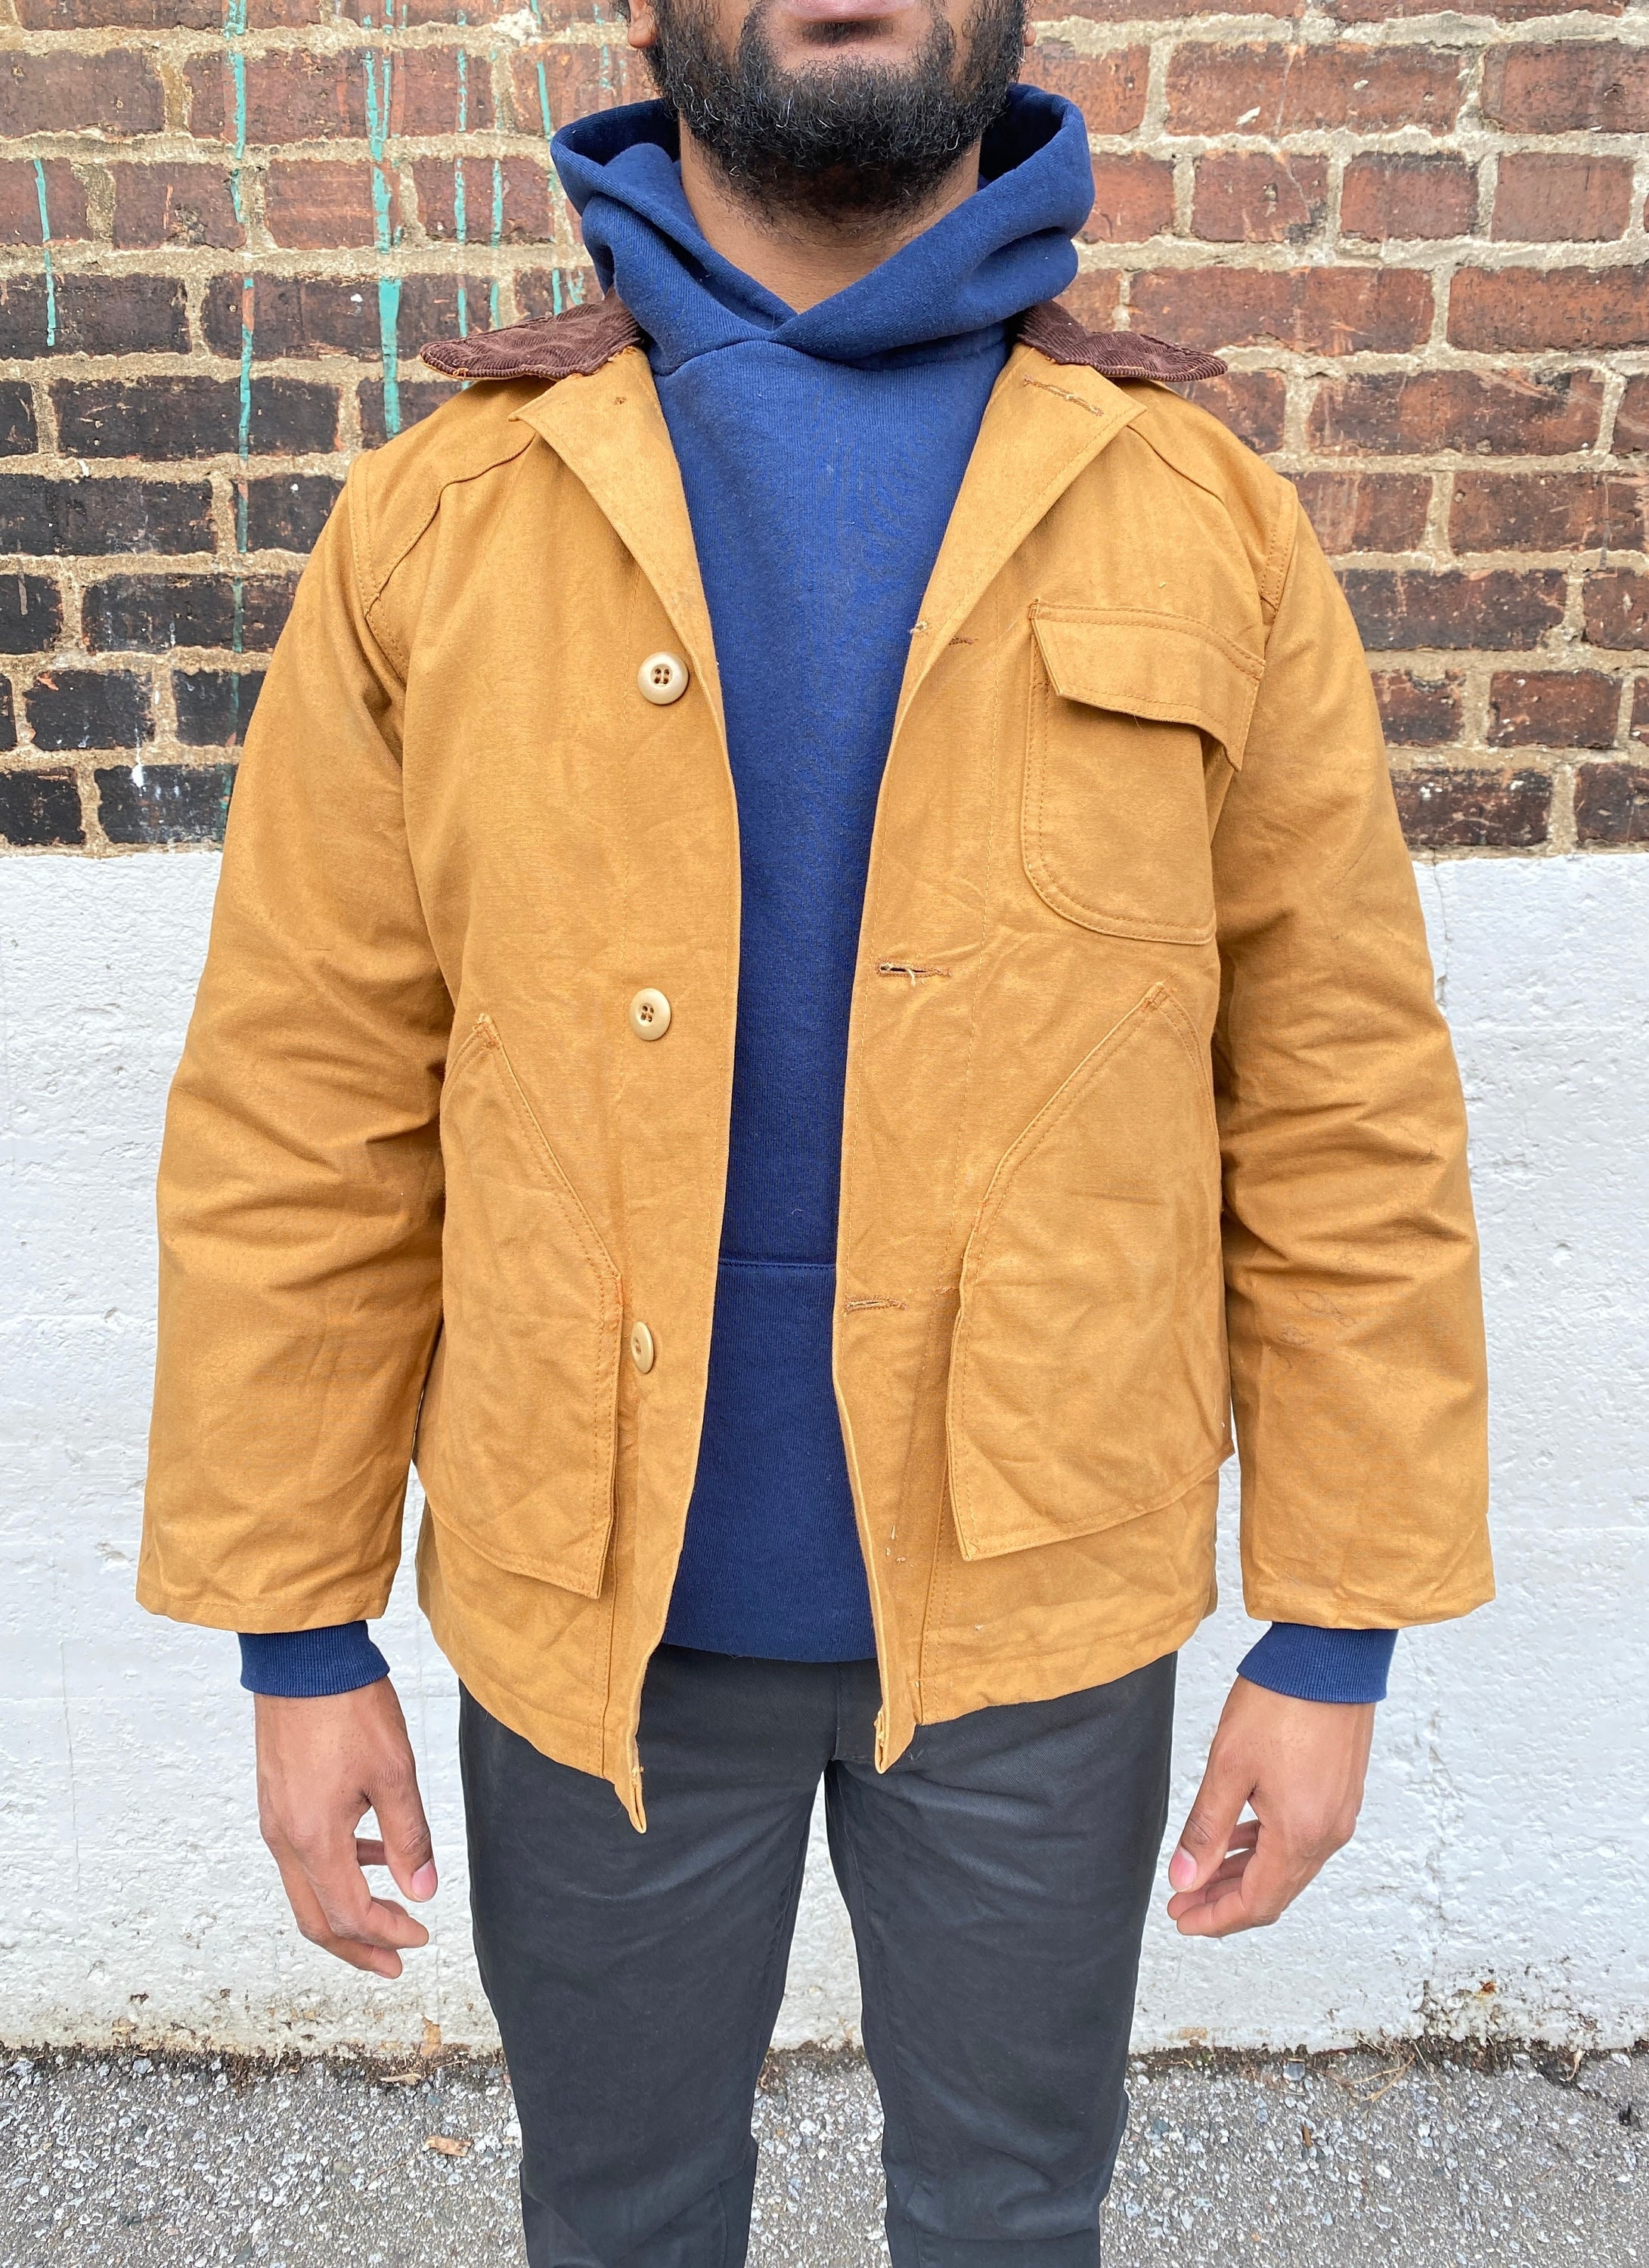 Vintage 1960s Foremost Canvas Hunting Jacket - Etsy